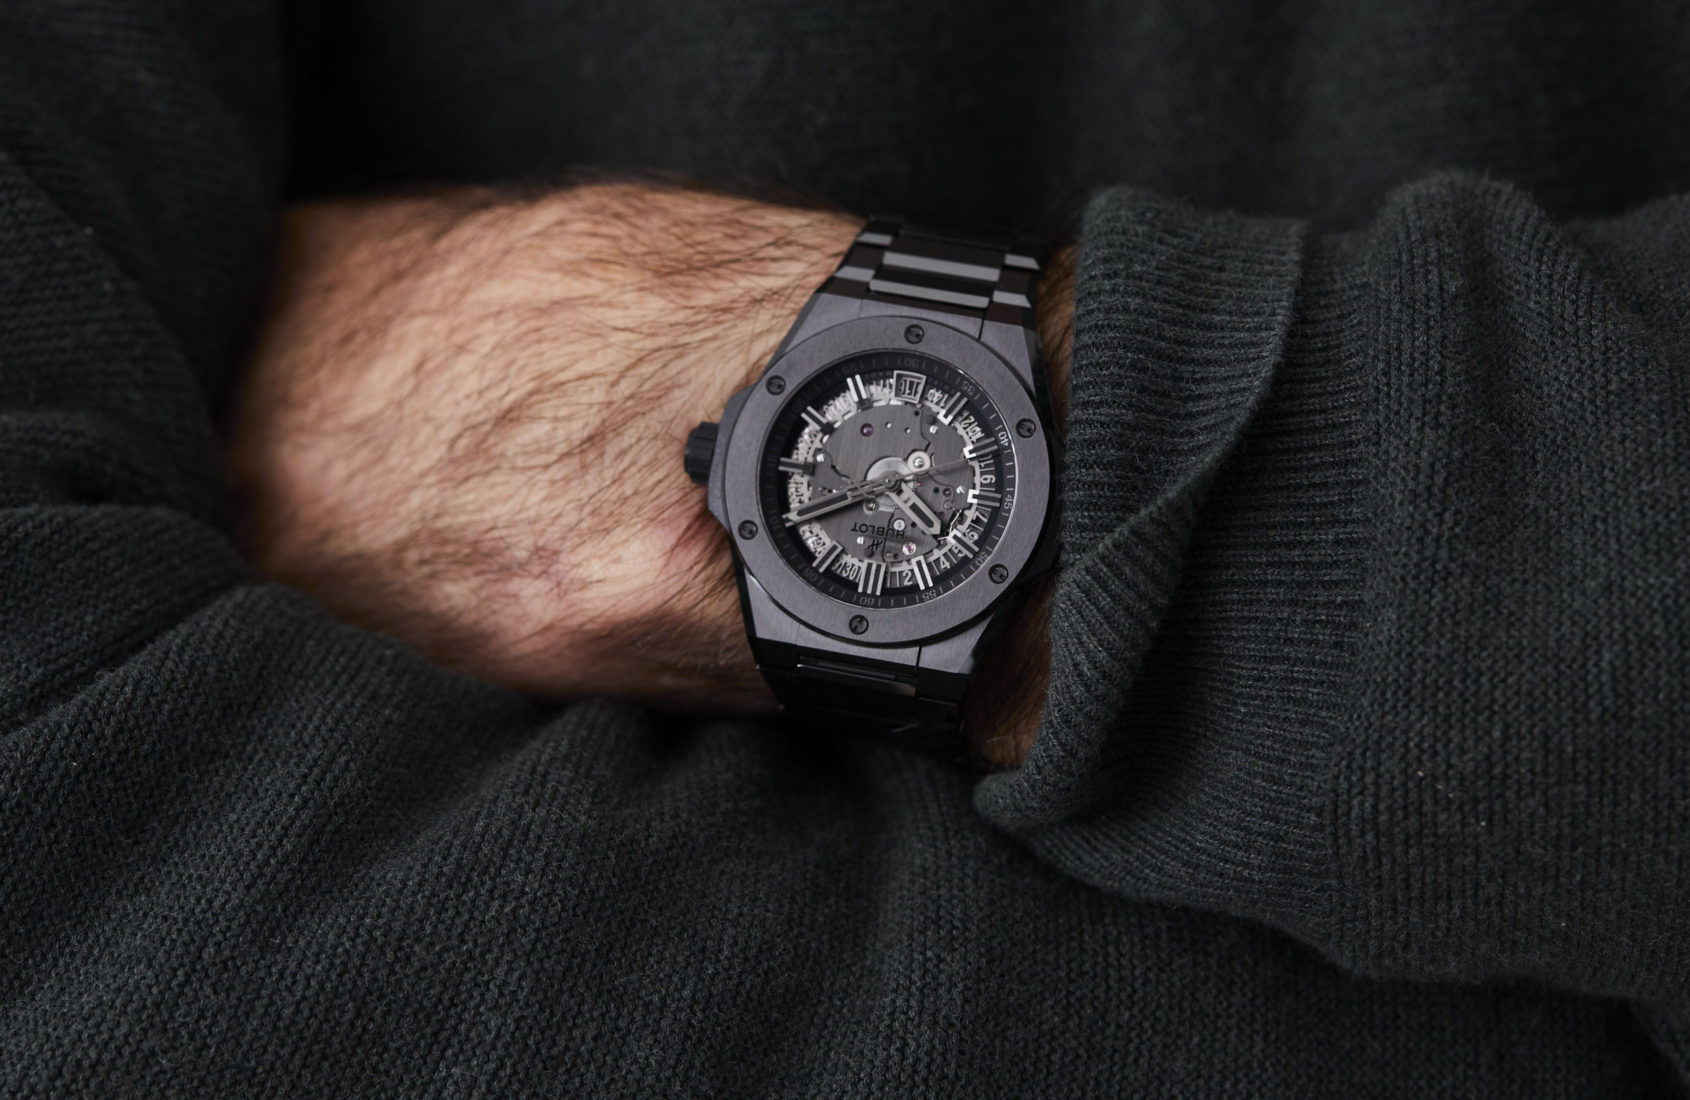 hublot integrated time only